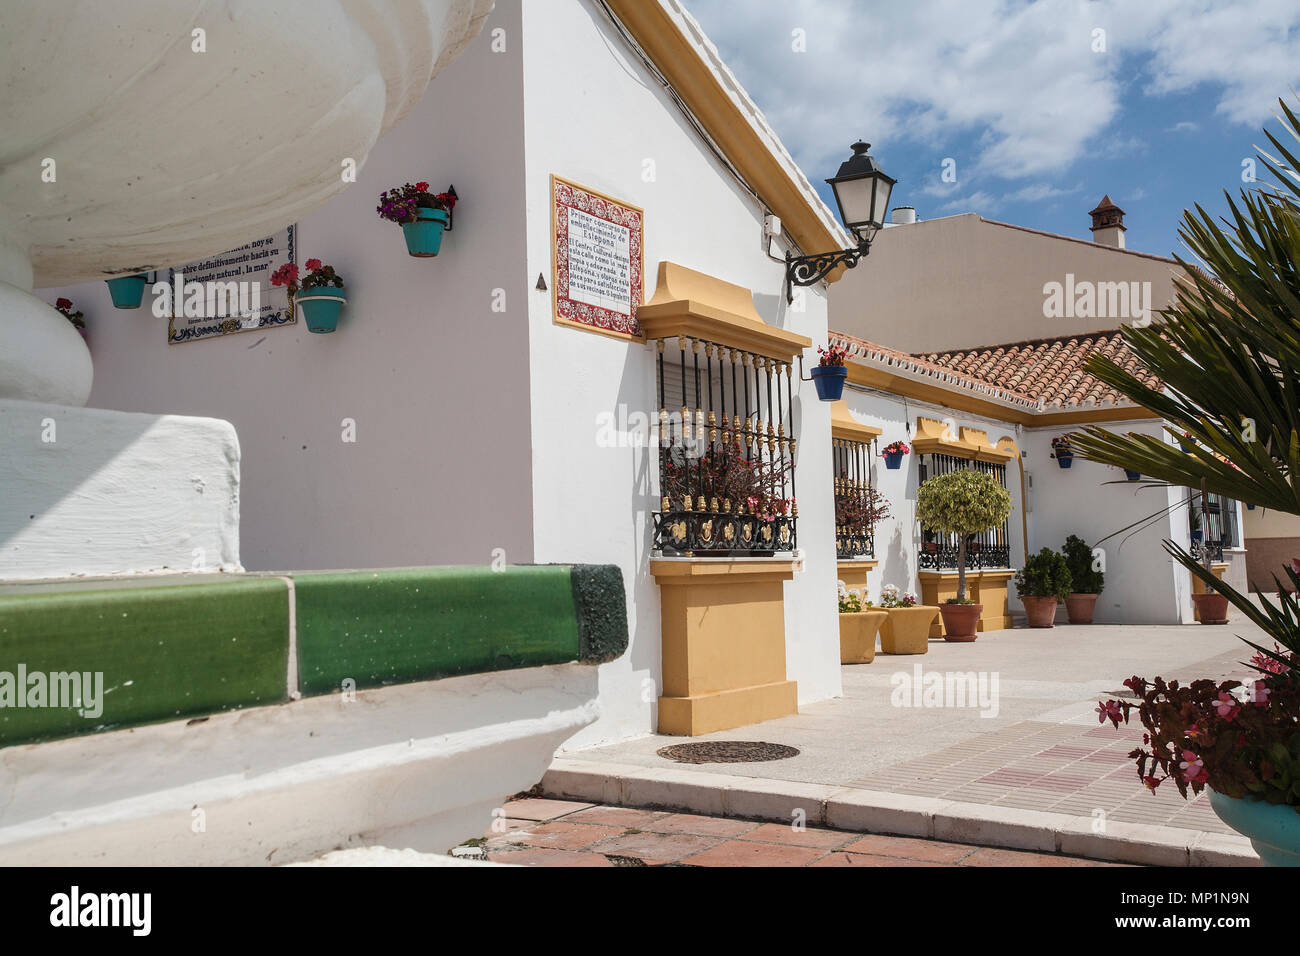 traditional housing in Spain Stock Photo